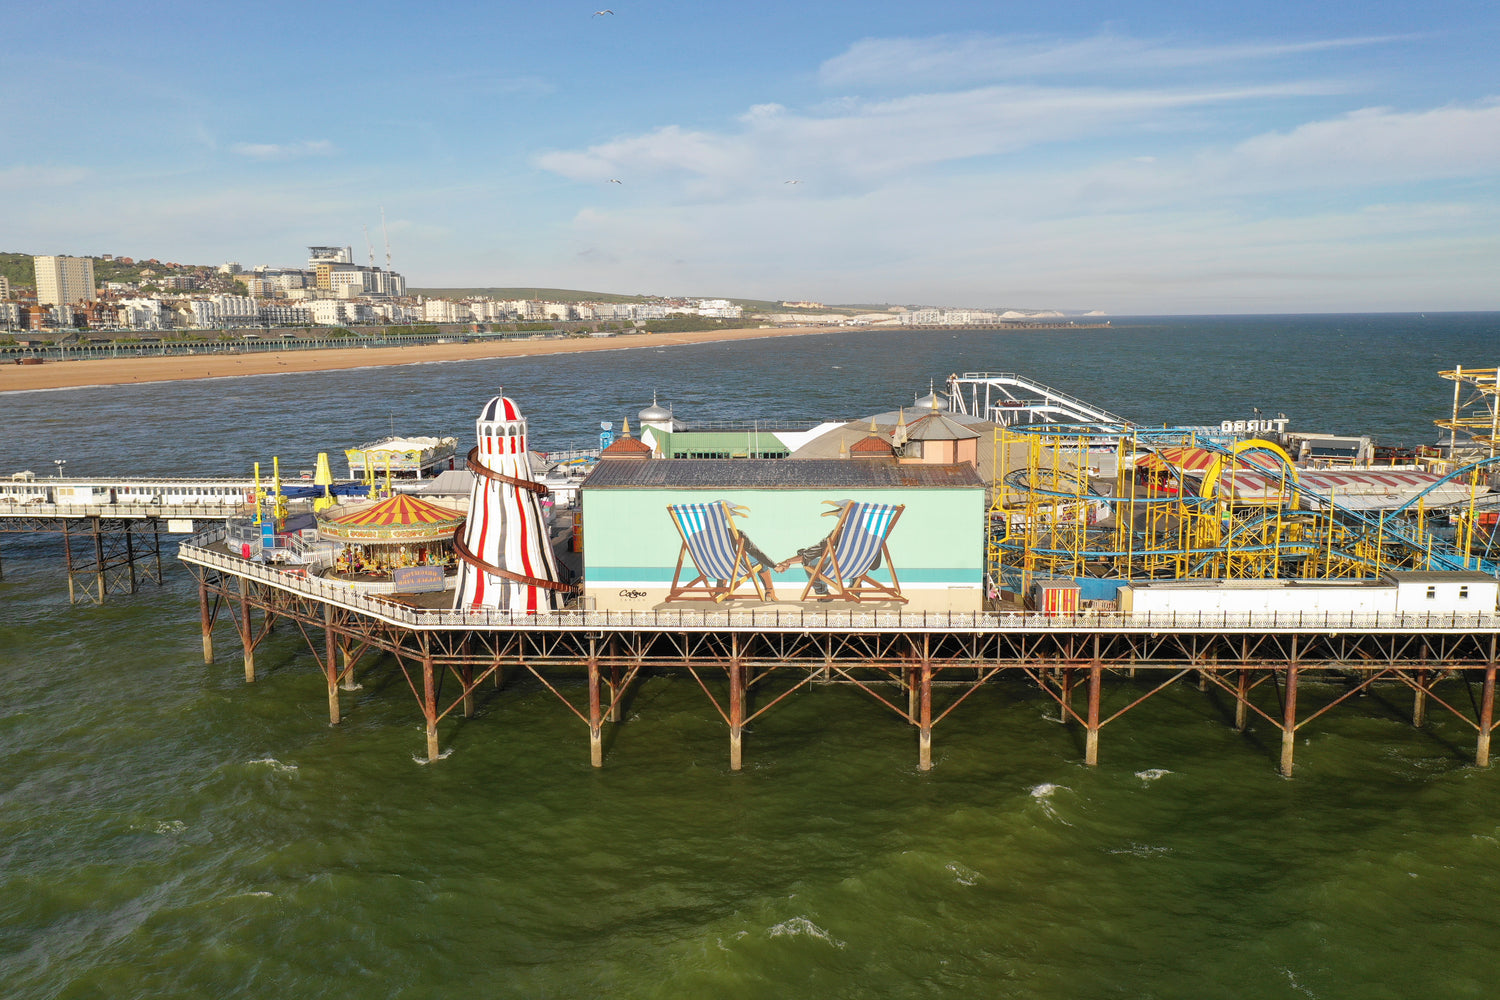 The Laughing Seagulls giant mural painted on Brighton Palace Pier